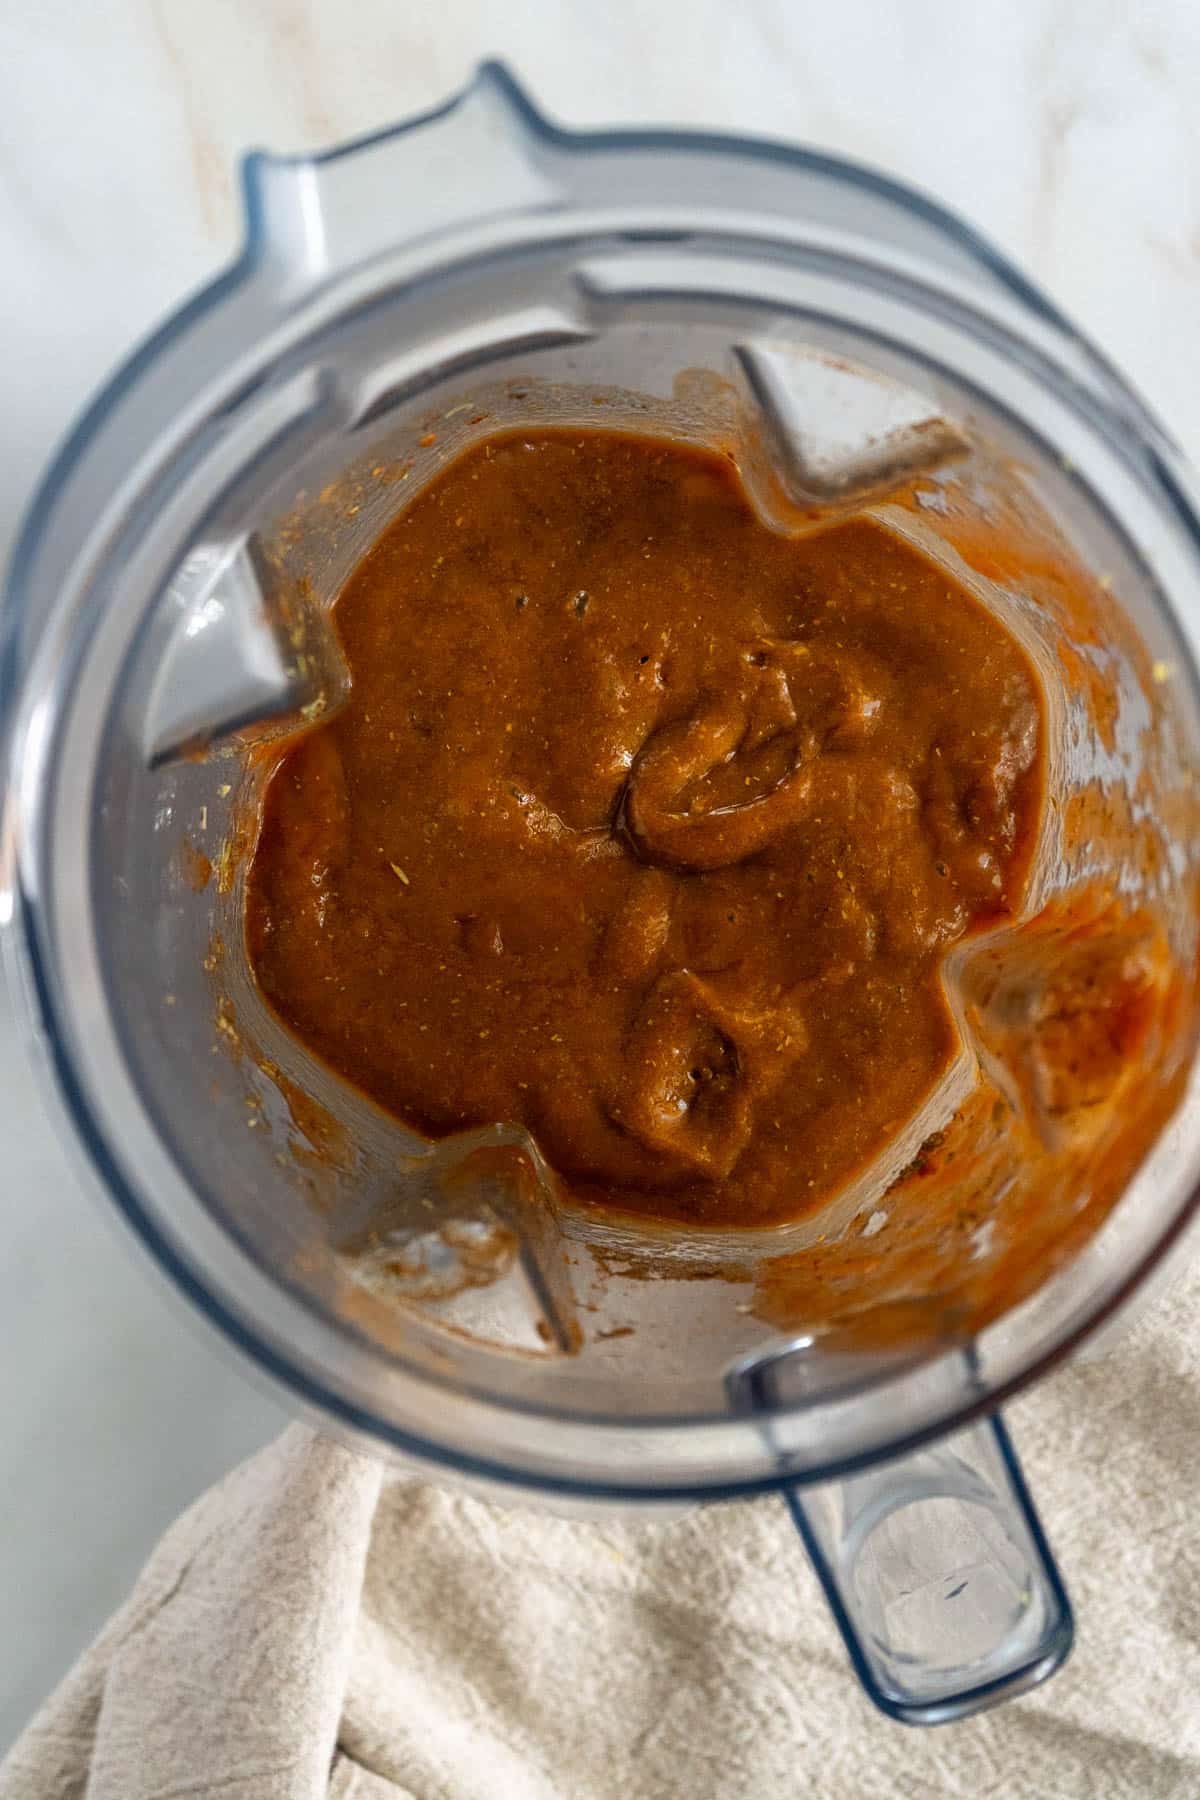 Pureed sauce in a blender.